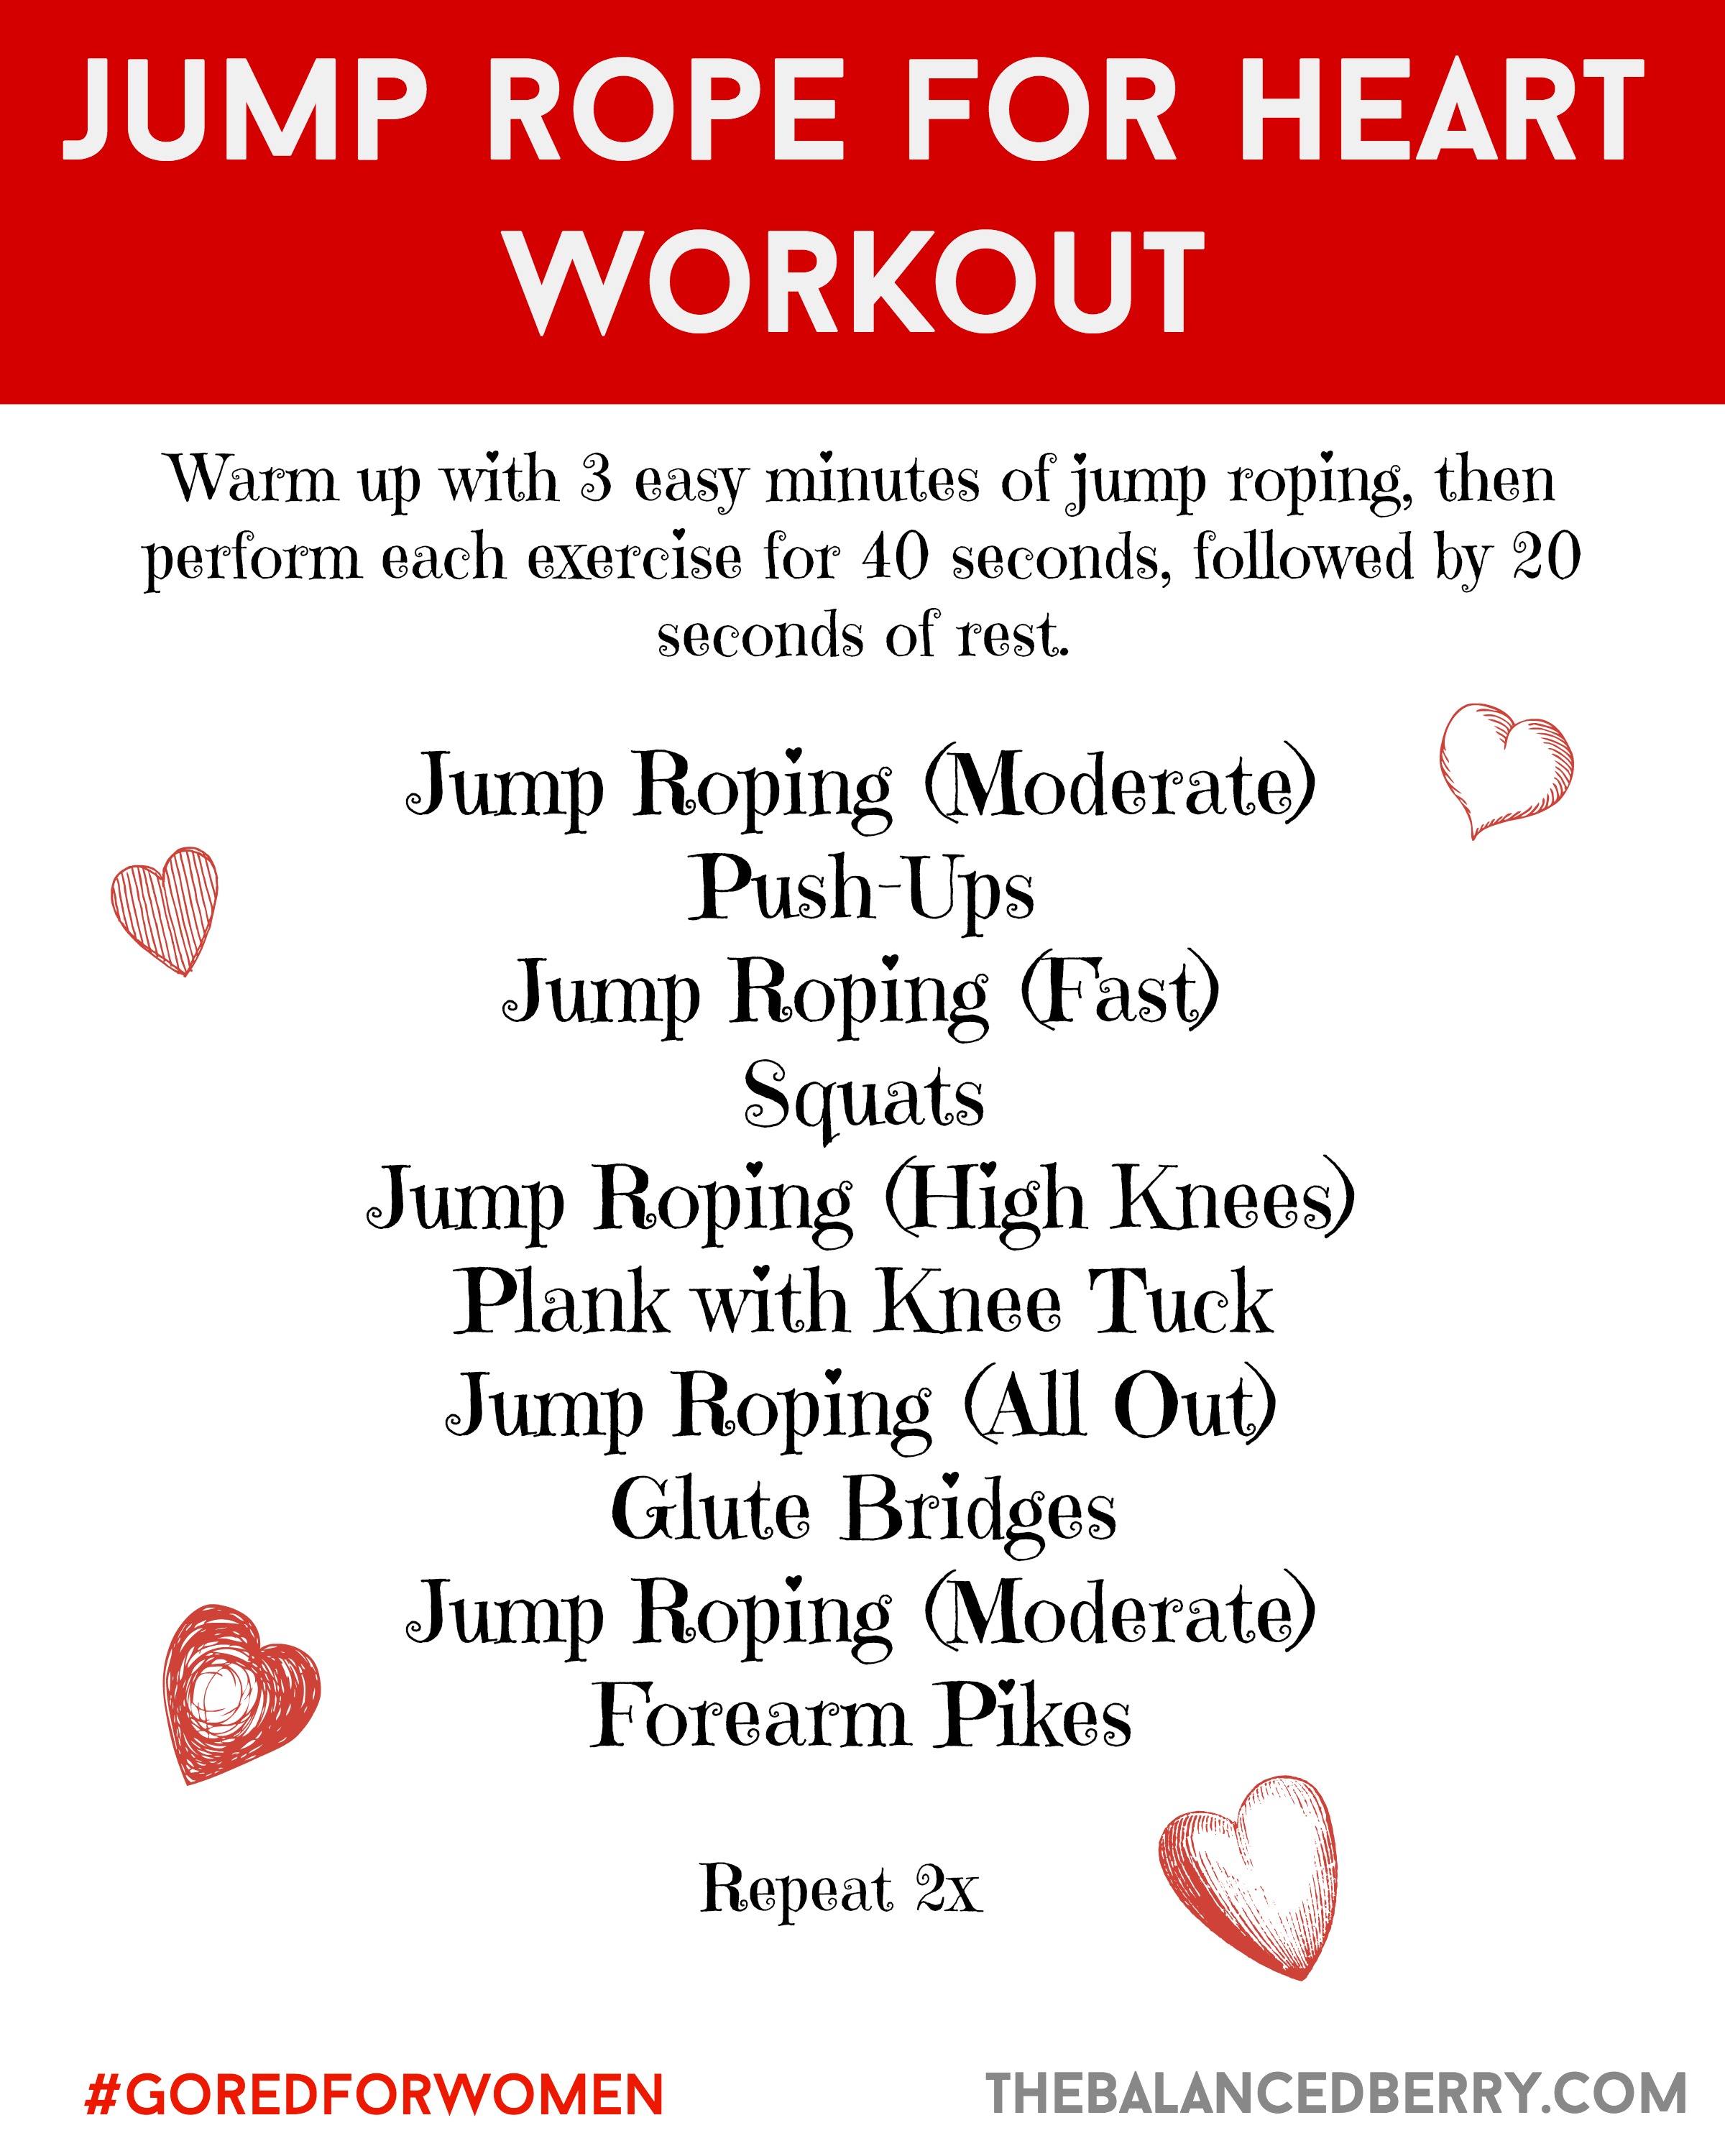 Jump Rope for Your Heart Workout. A quick, effective cardio and bodyweight strength circuit. #goredforwomen | thebalancedberry.com